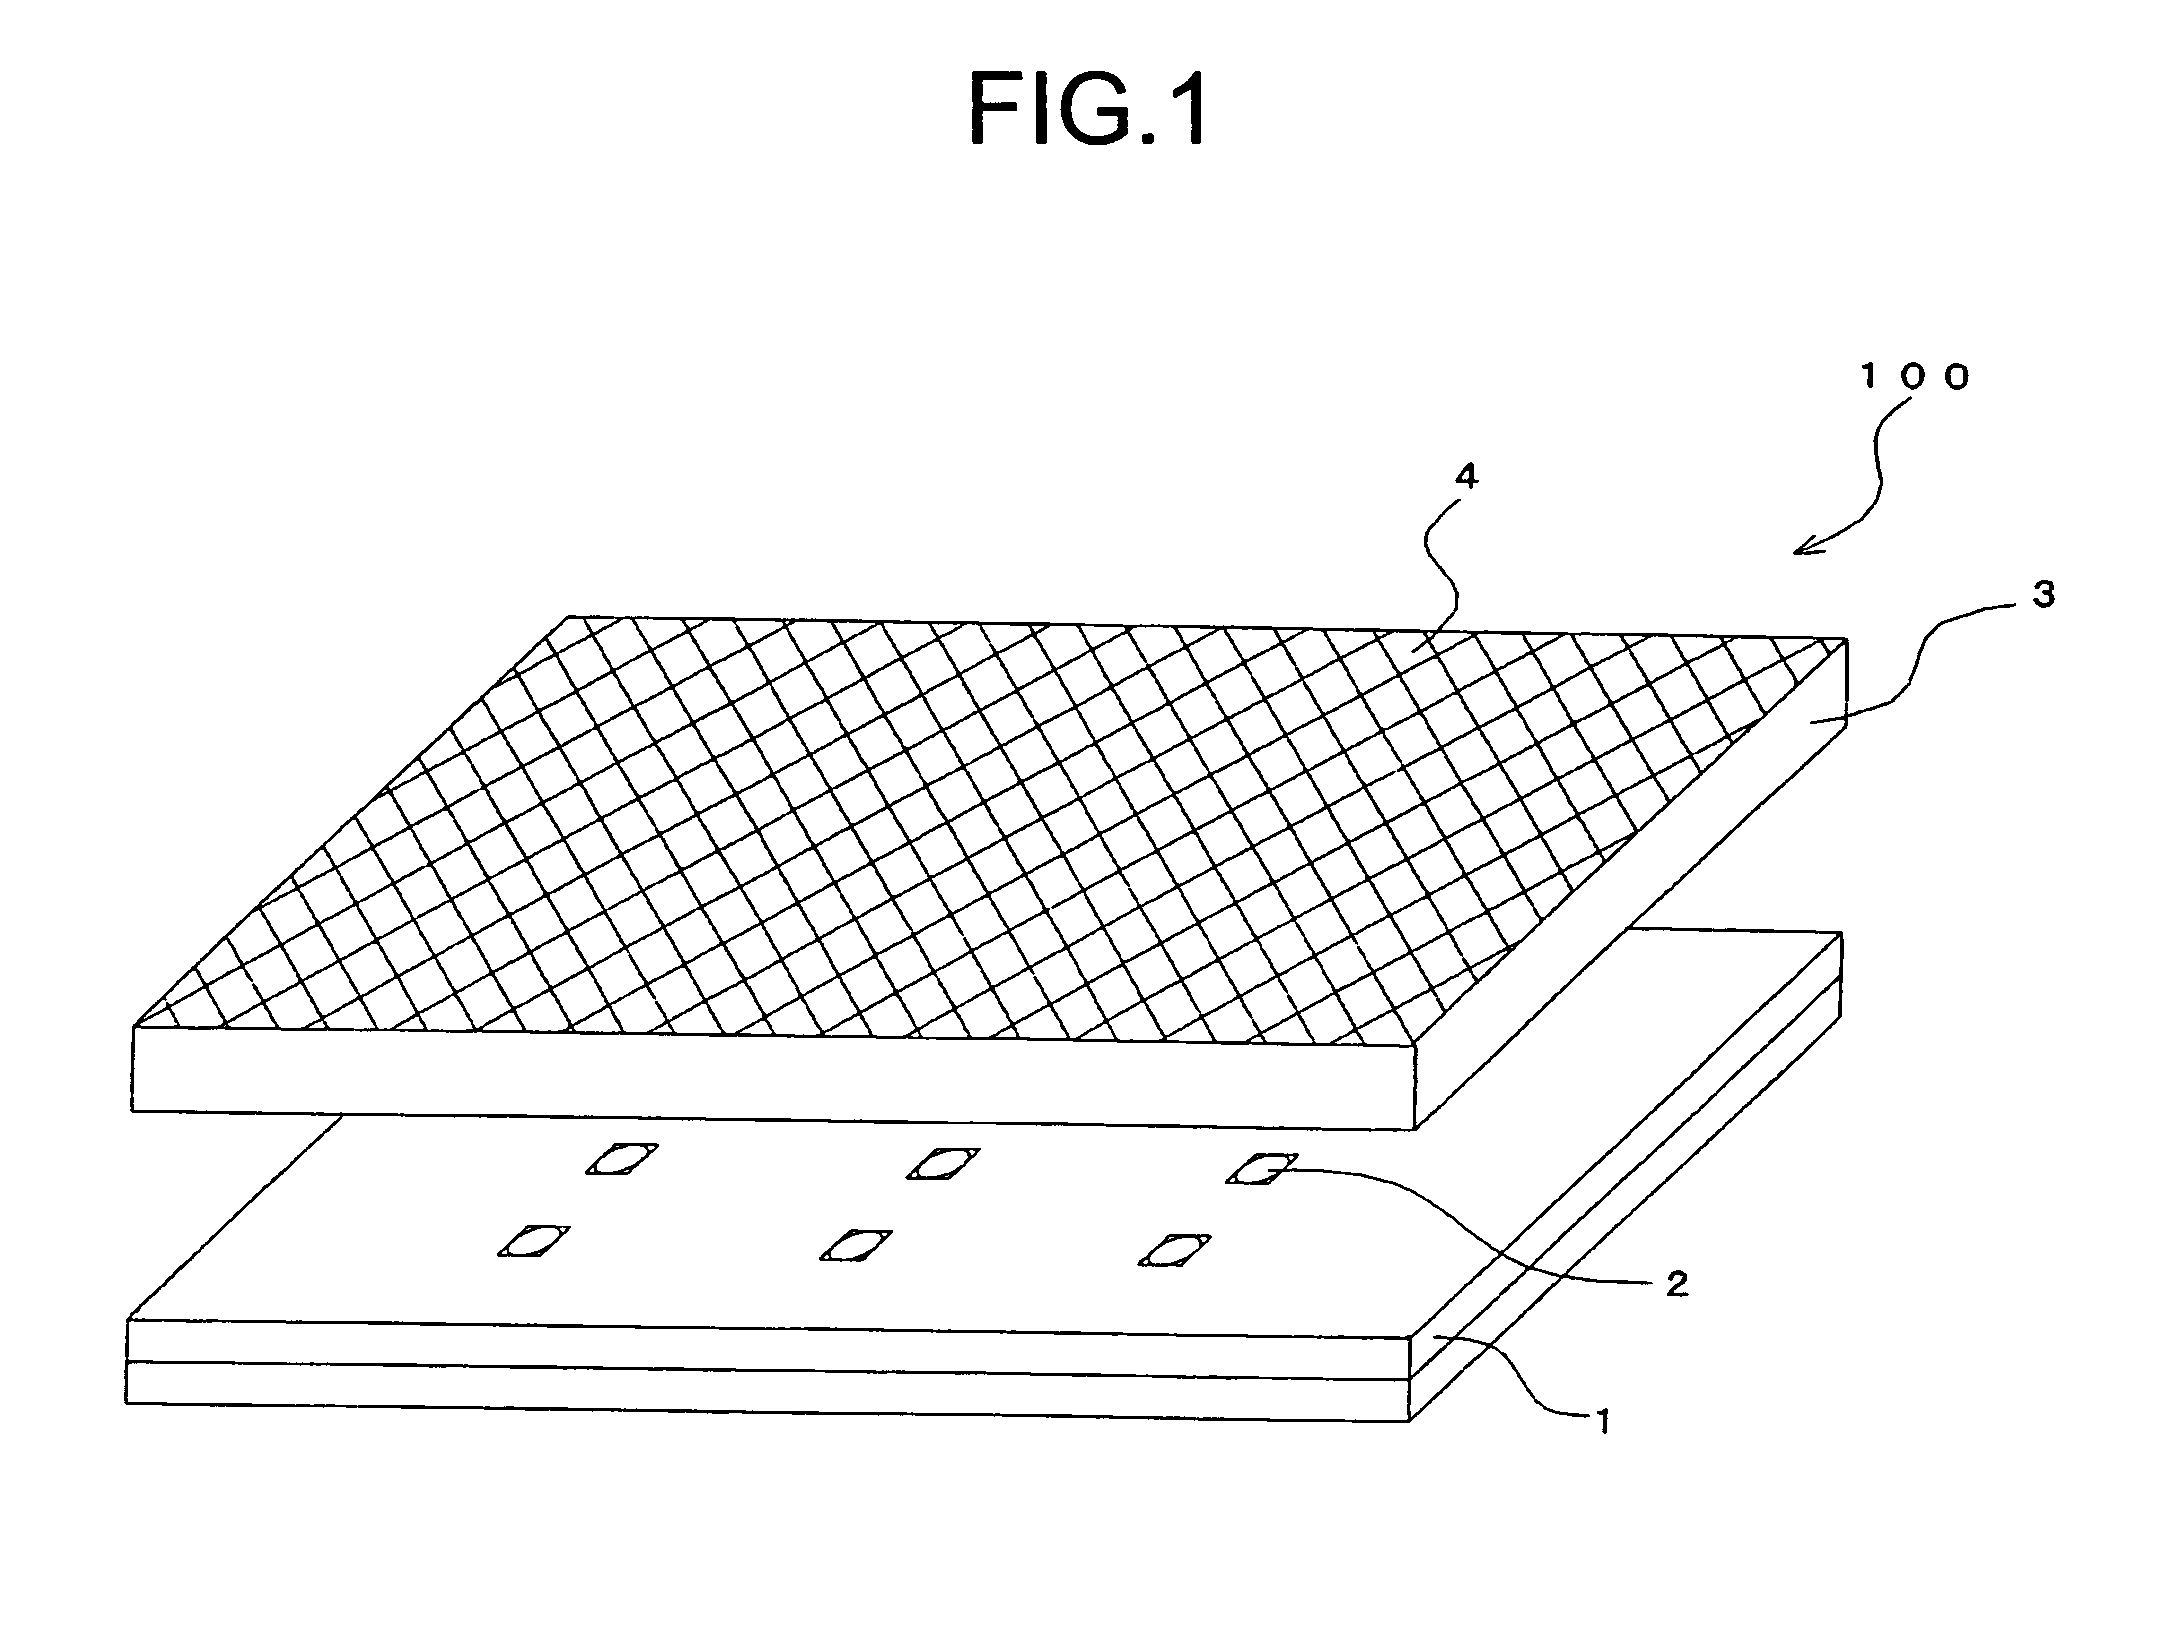 Direct-type backlight device